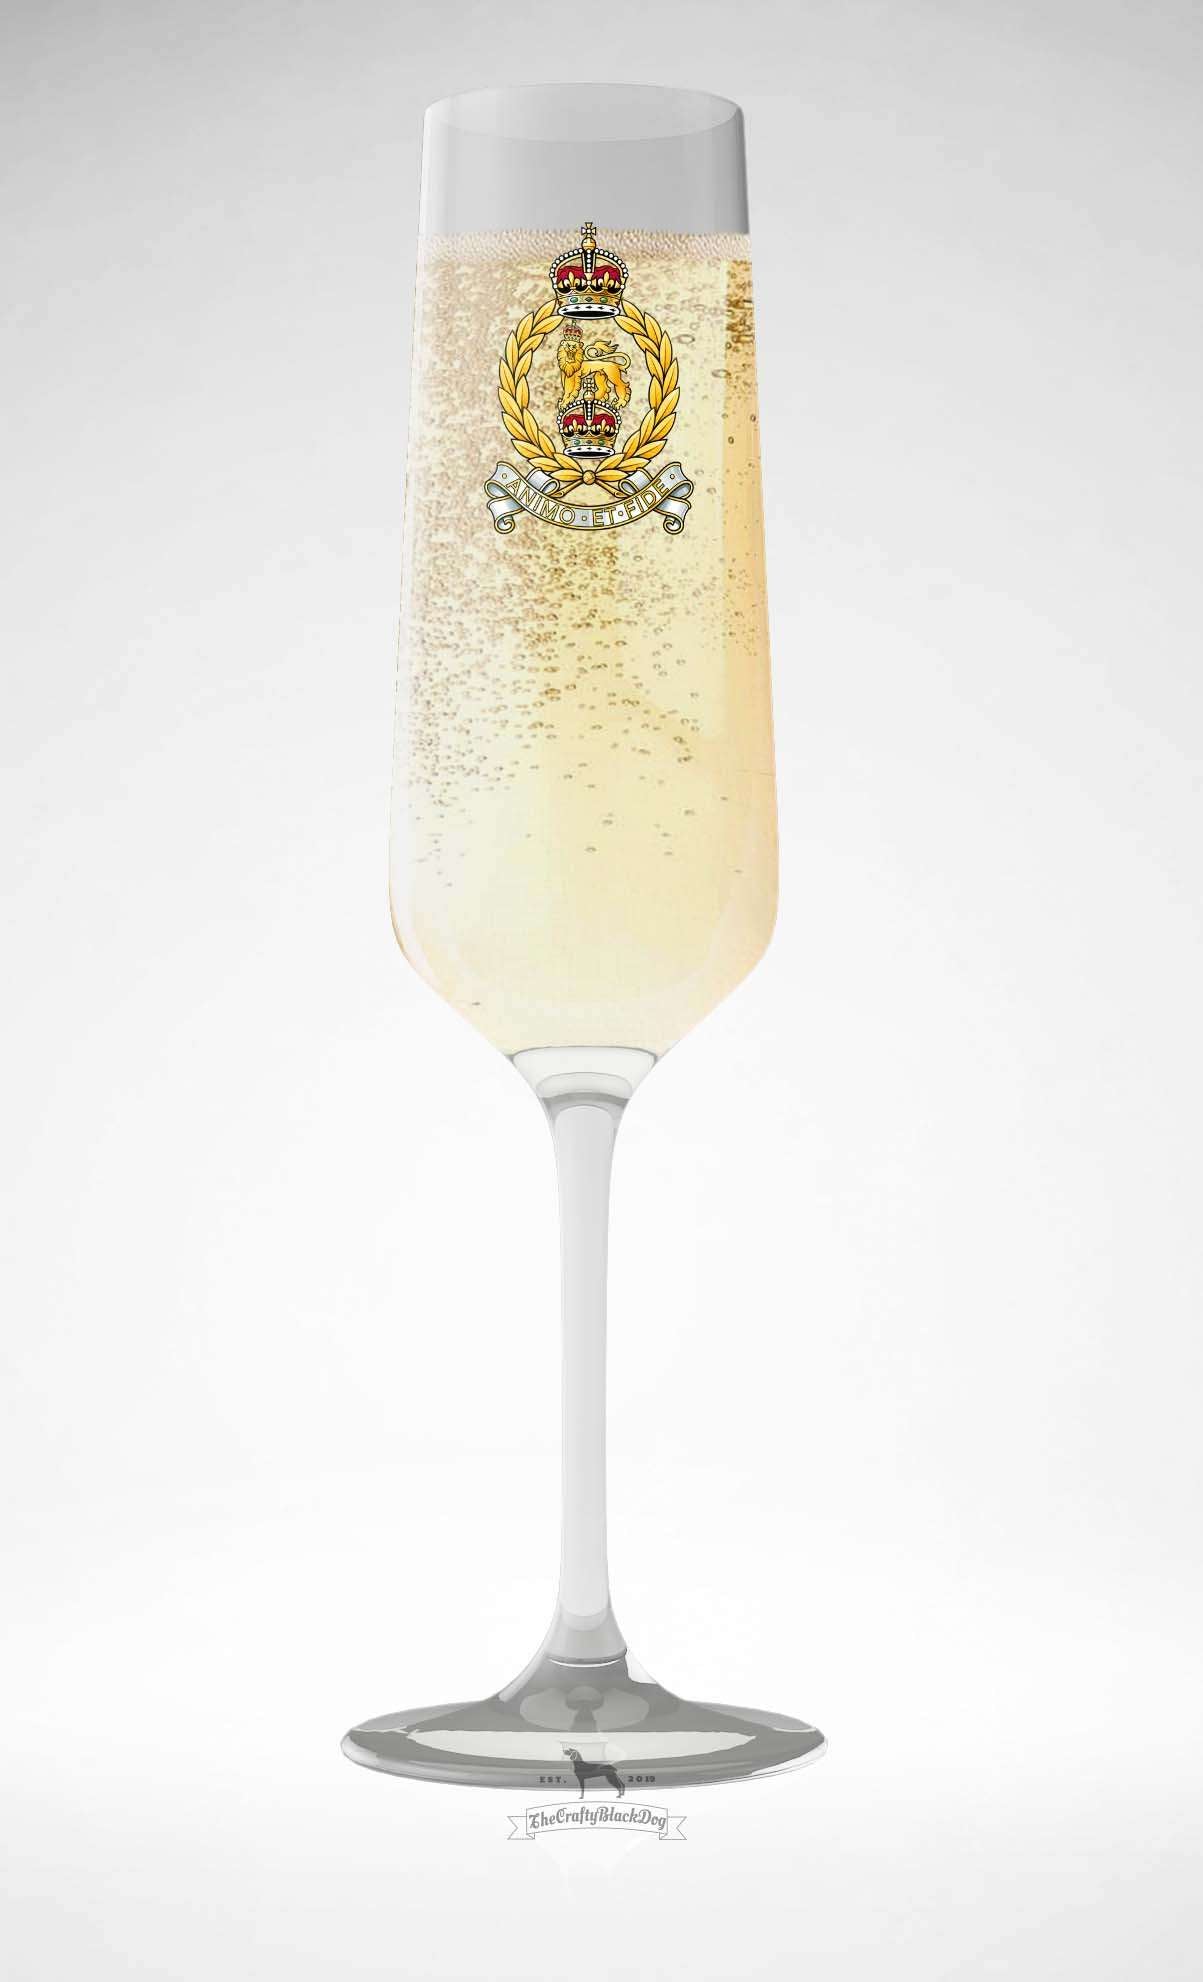 Adjutant General's Corps - Champagne/Prosecco Flutes (New King's Crown)